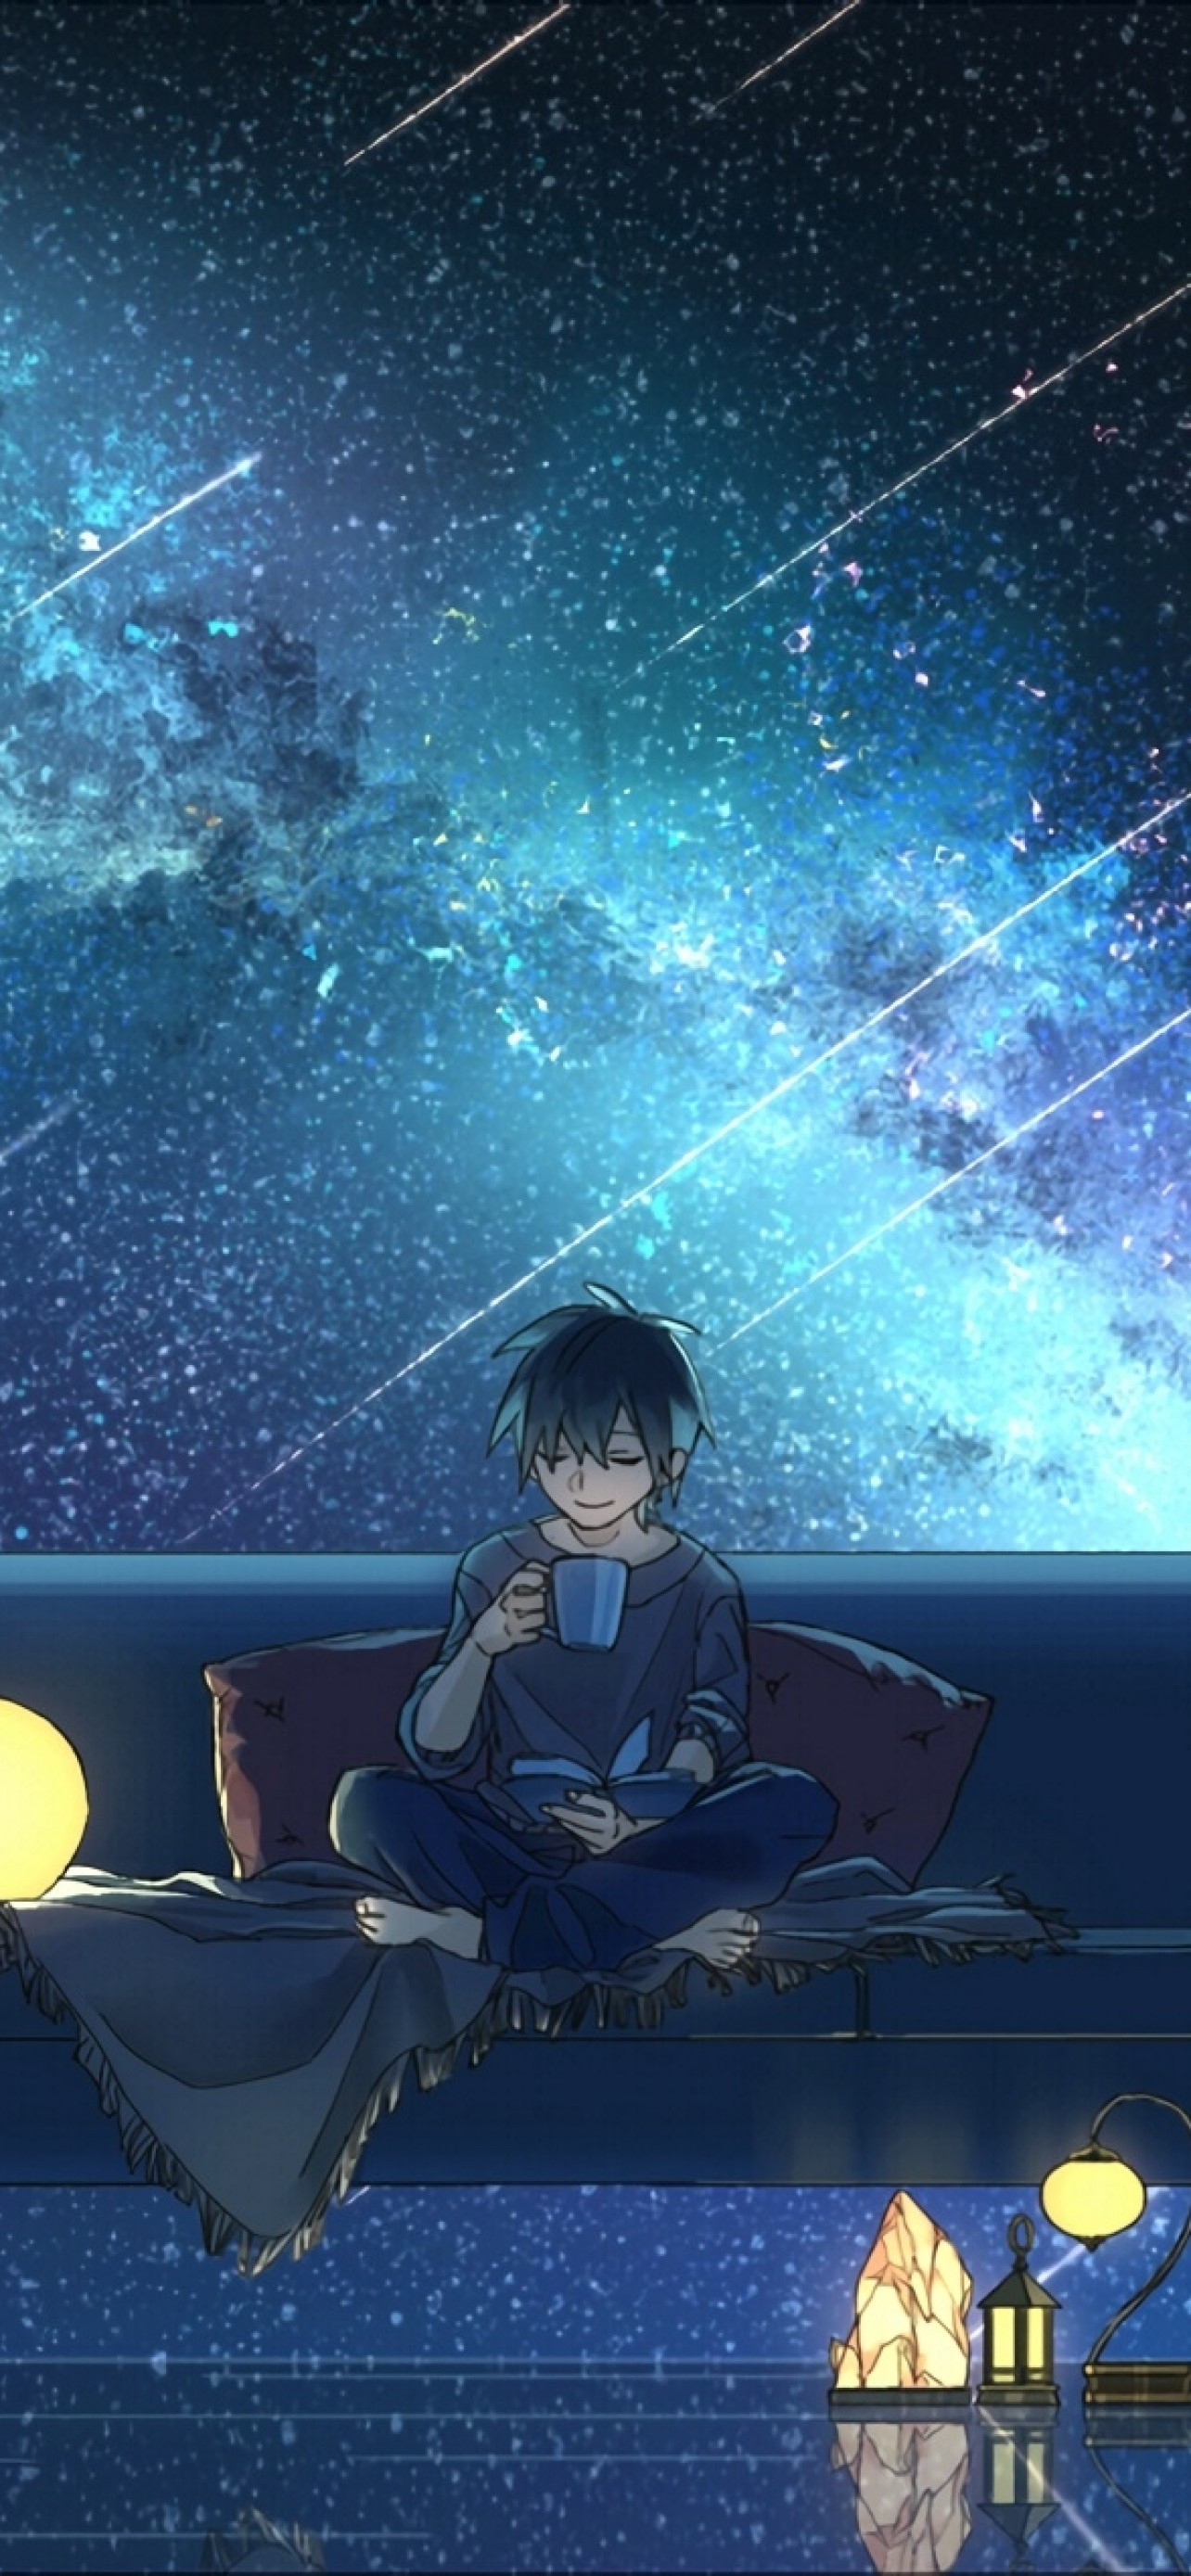 Download 1284x2778 Anime Boy, Anime Landscape, Starry Sky, Night, Scenery, Barefoot, Drink, Faling Stars Wallpaper for iPhone 12 Pro Max